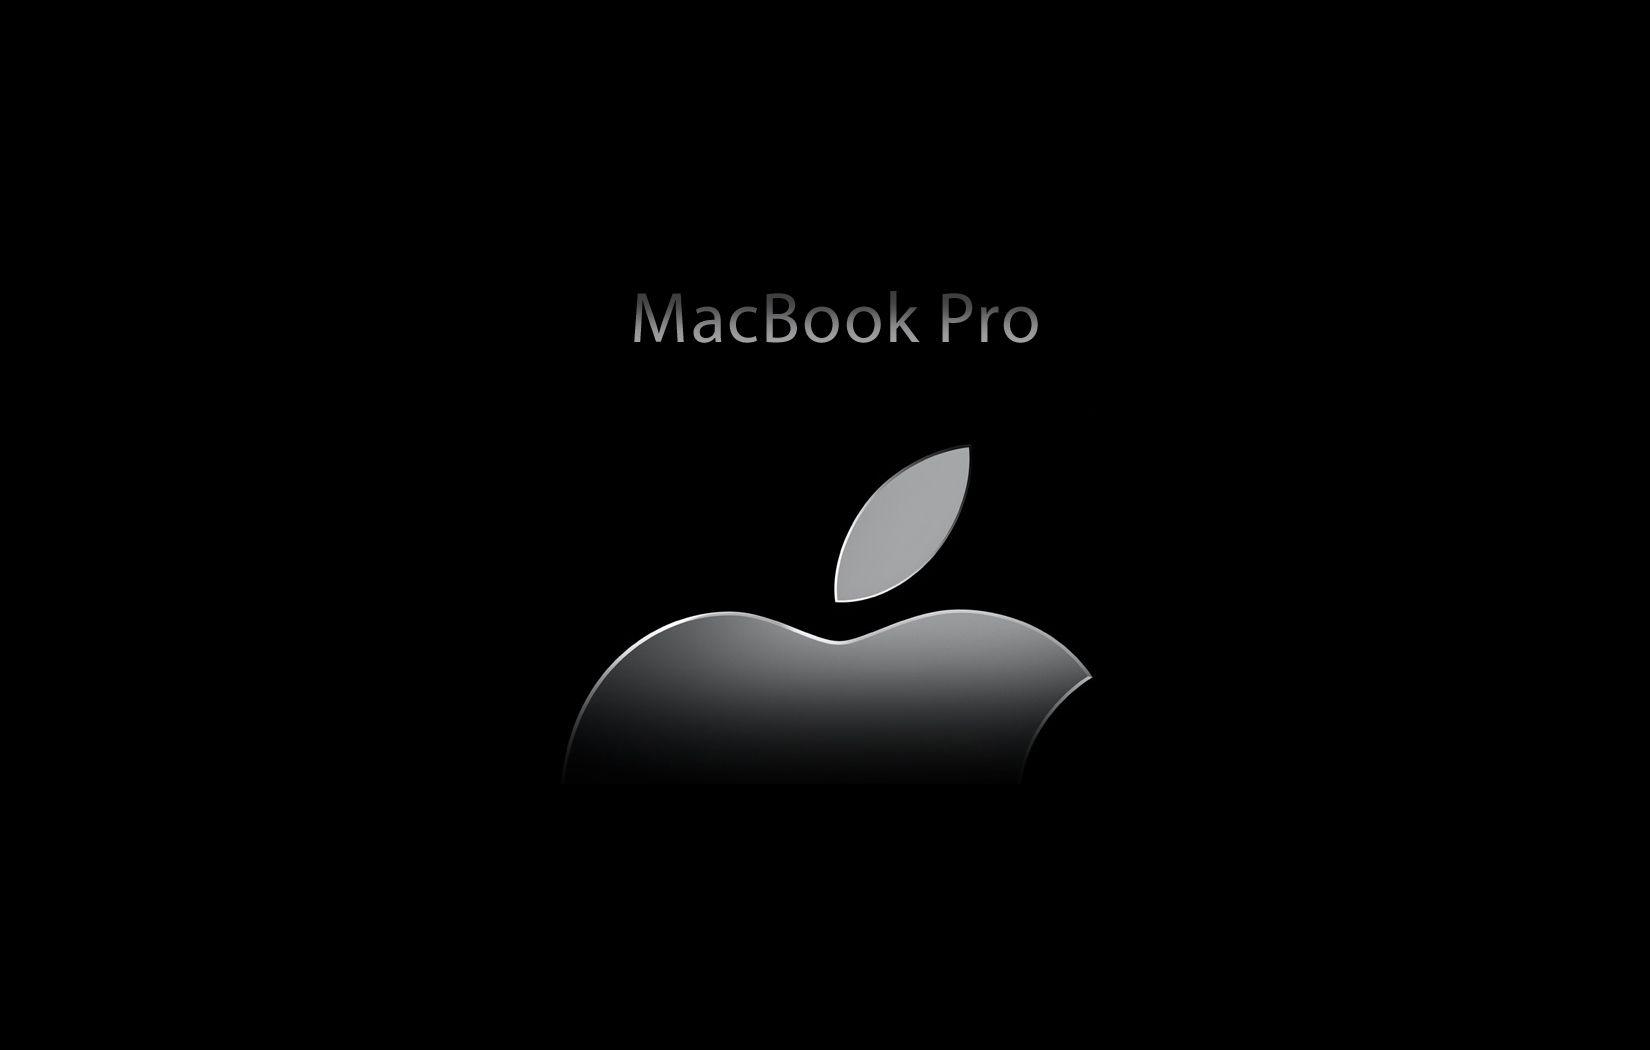 Apple logo macbook pro 15 size knocked it out of the park